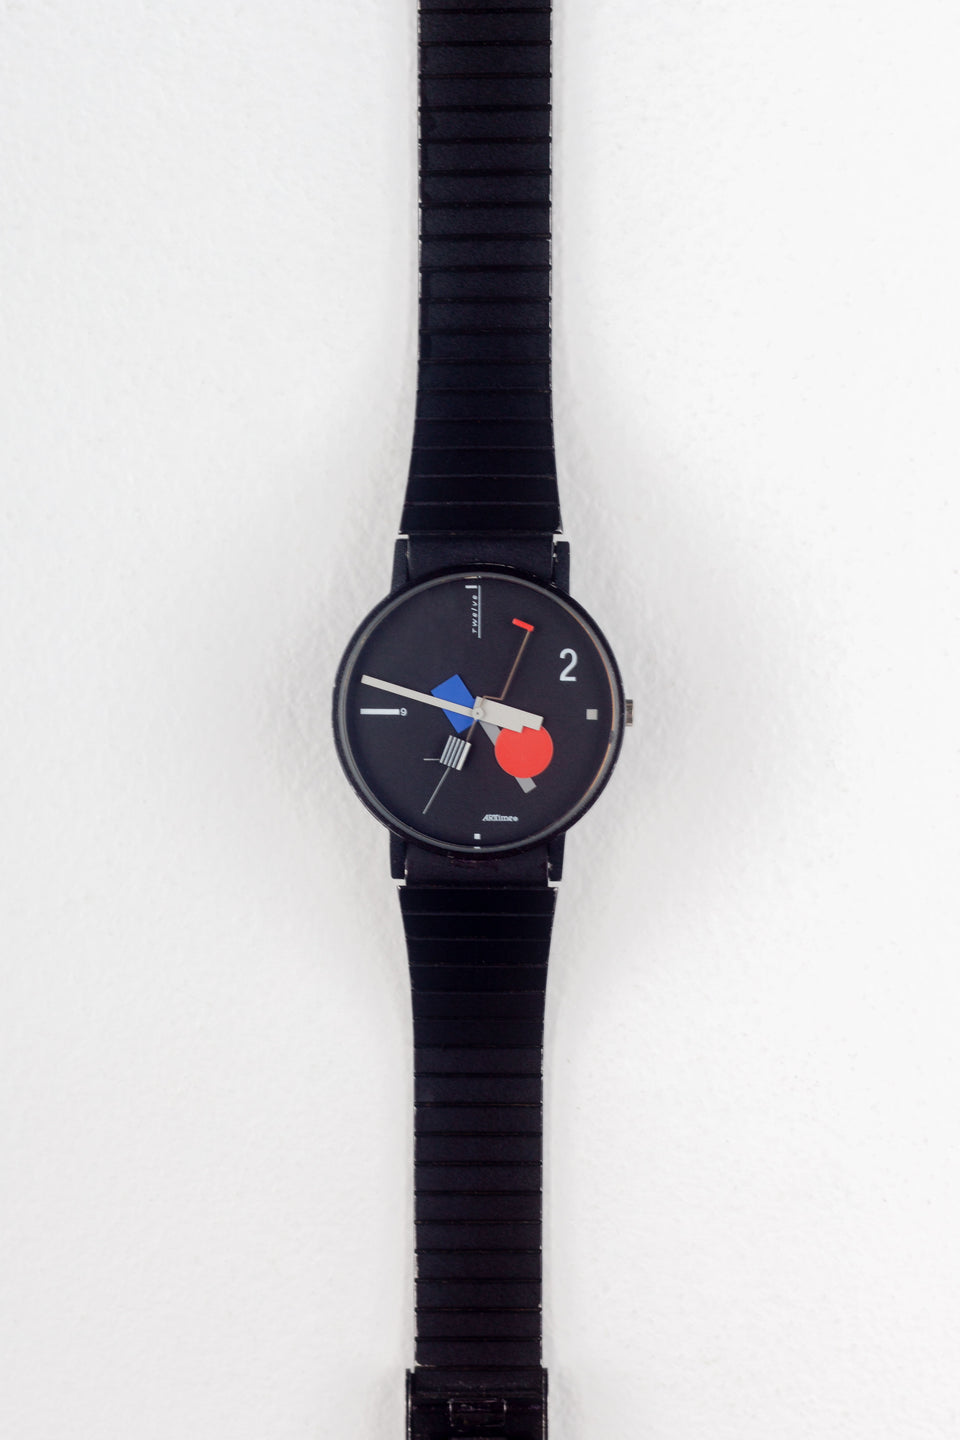 Rare Memphis Postmodern Wristwatch by Nicolai Canetti for ArTime Collection, 1986 Swiss made